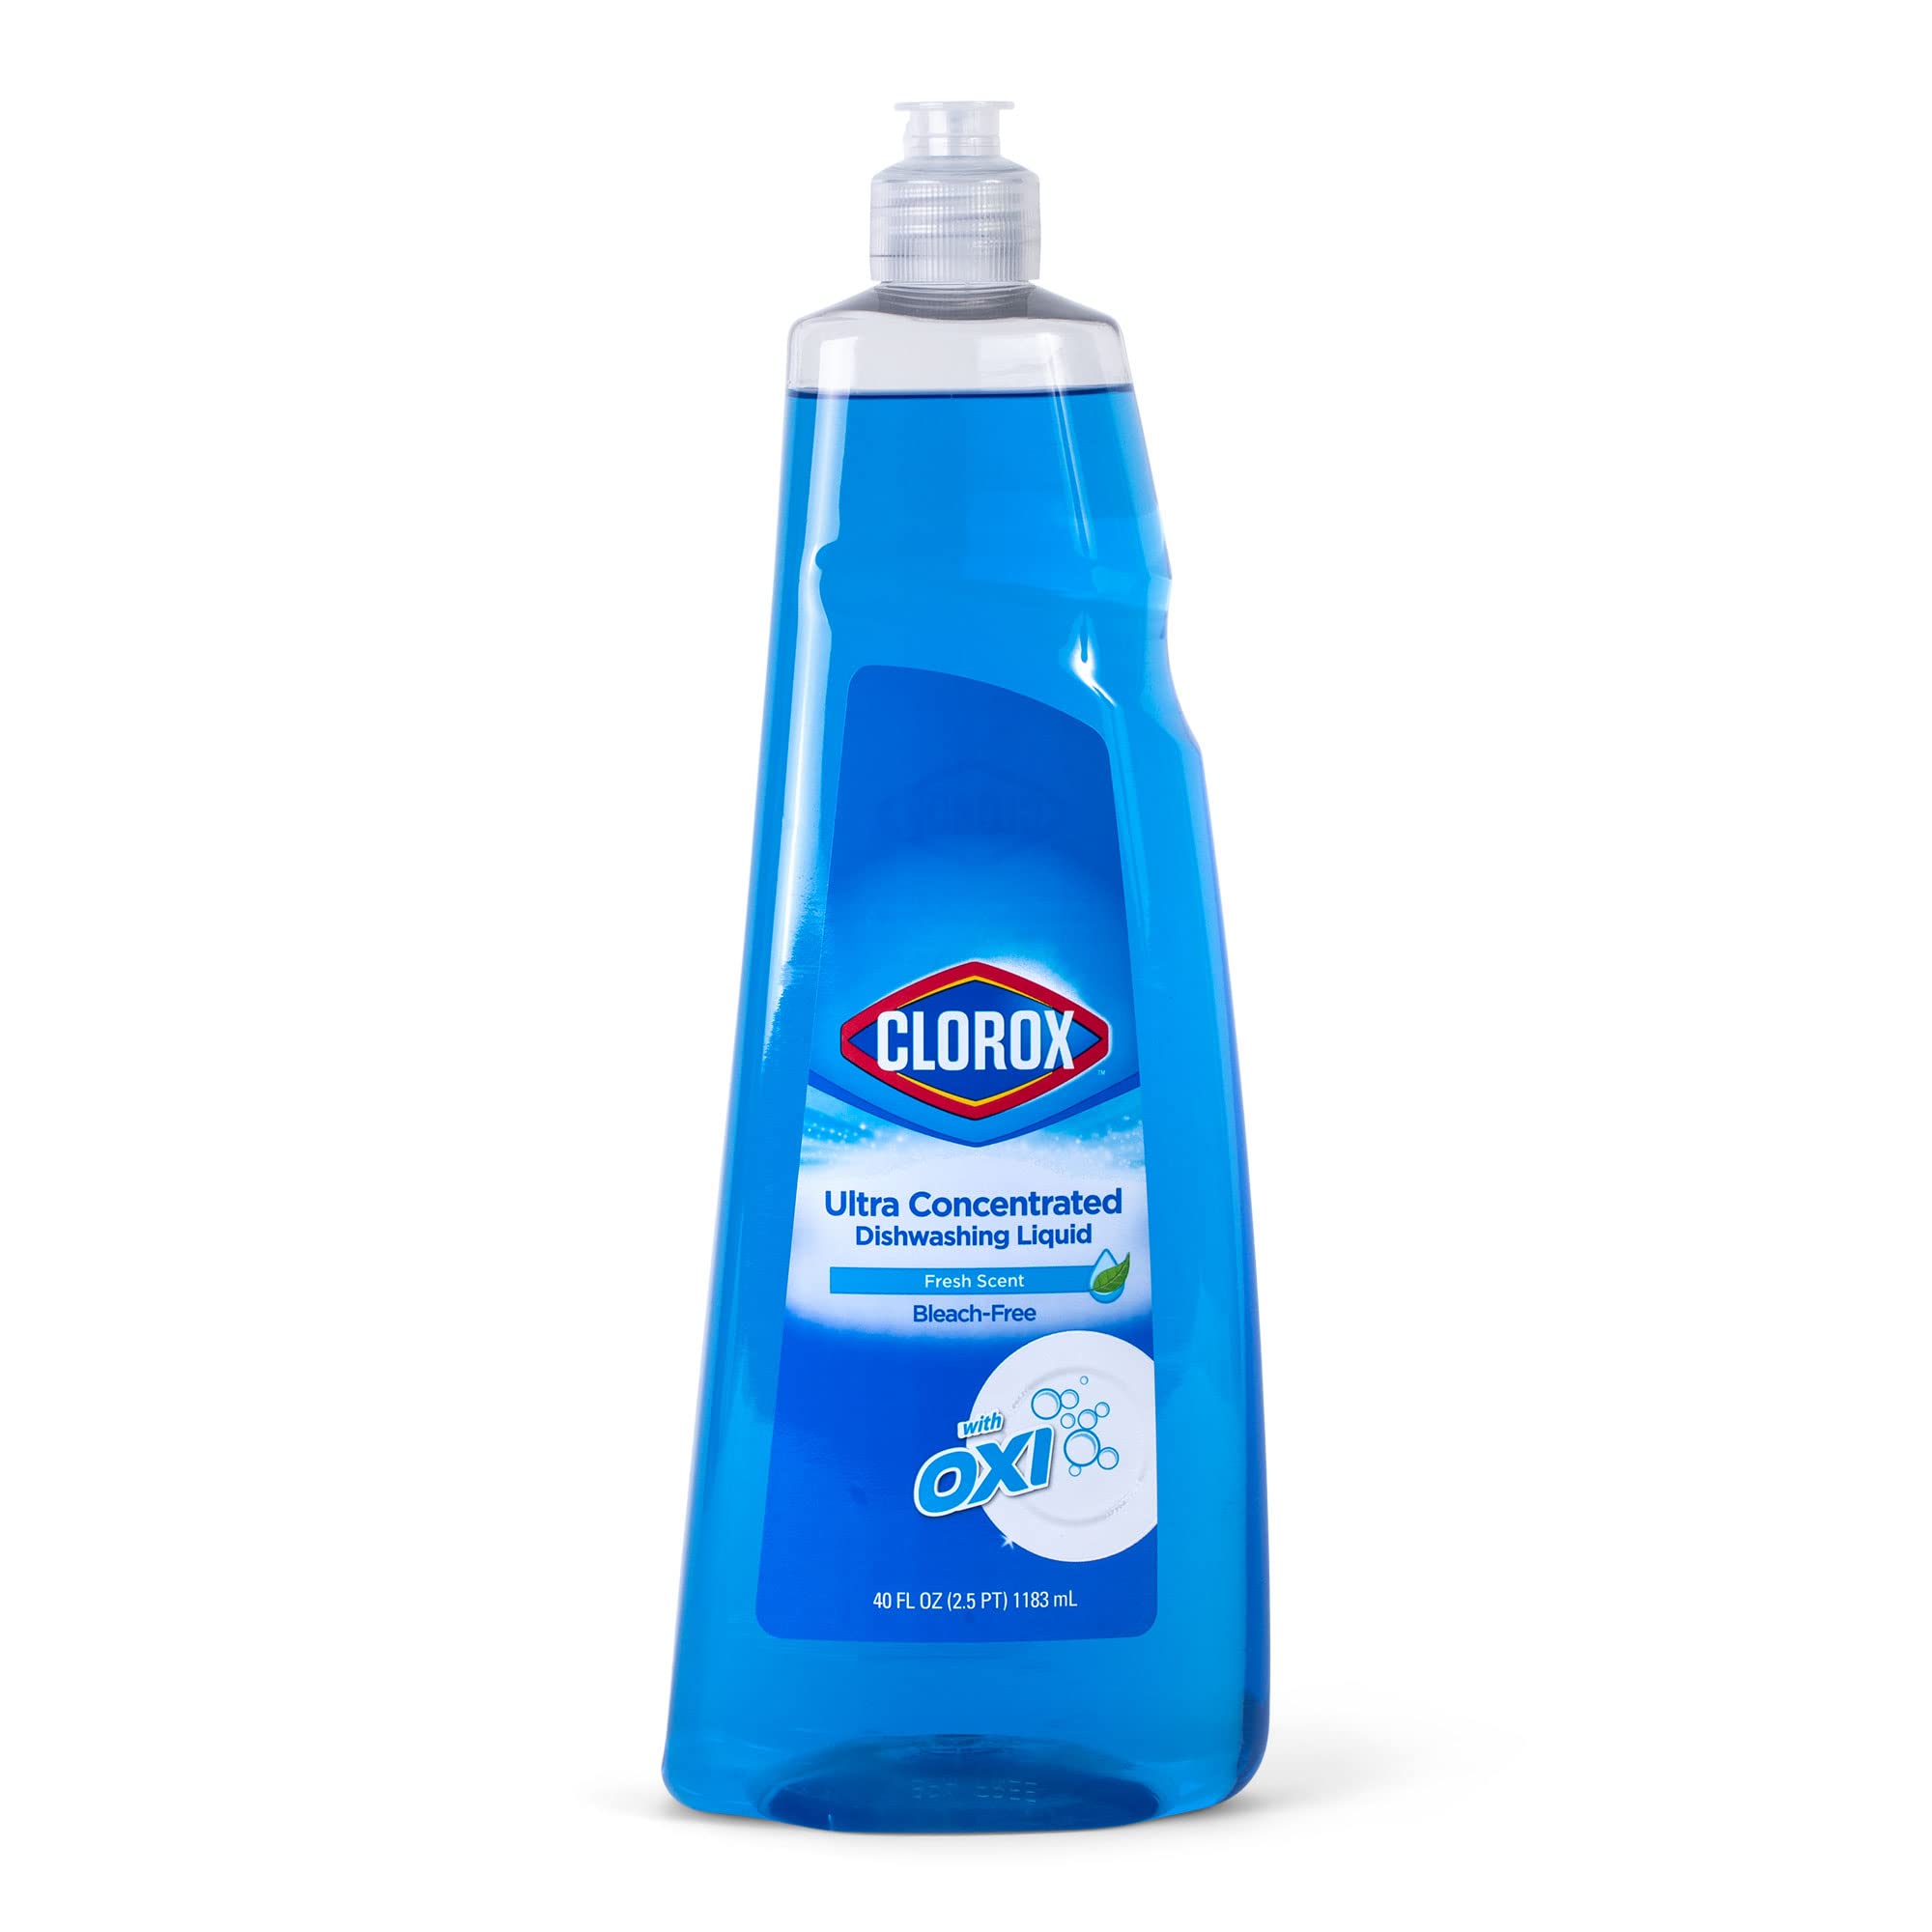 Clorox Liquid Dish Soap with Oxi in Fresh Scent, 40 Fl Oz | Bleach-Free Dishwashing Liquid Powers Through Grease to Wash Dishes and Clean | Ultra Concentrated Clorox Dishwashing Soap